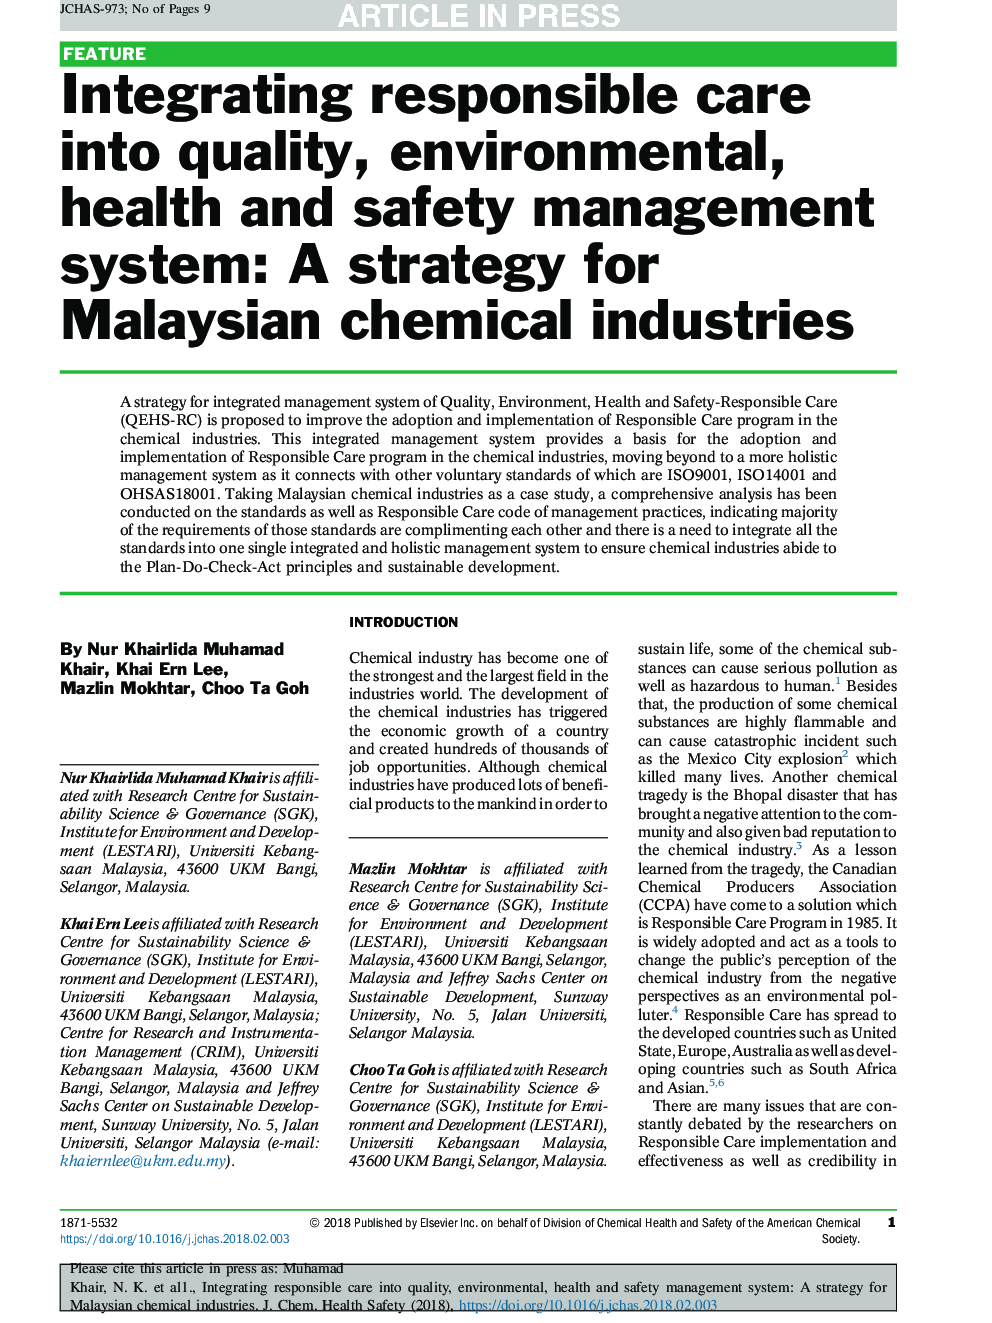 Integrating responsible care into quality, environmental, health and safety management system: A strategy for Malaysian chemical industries